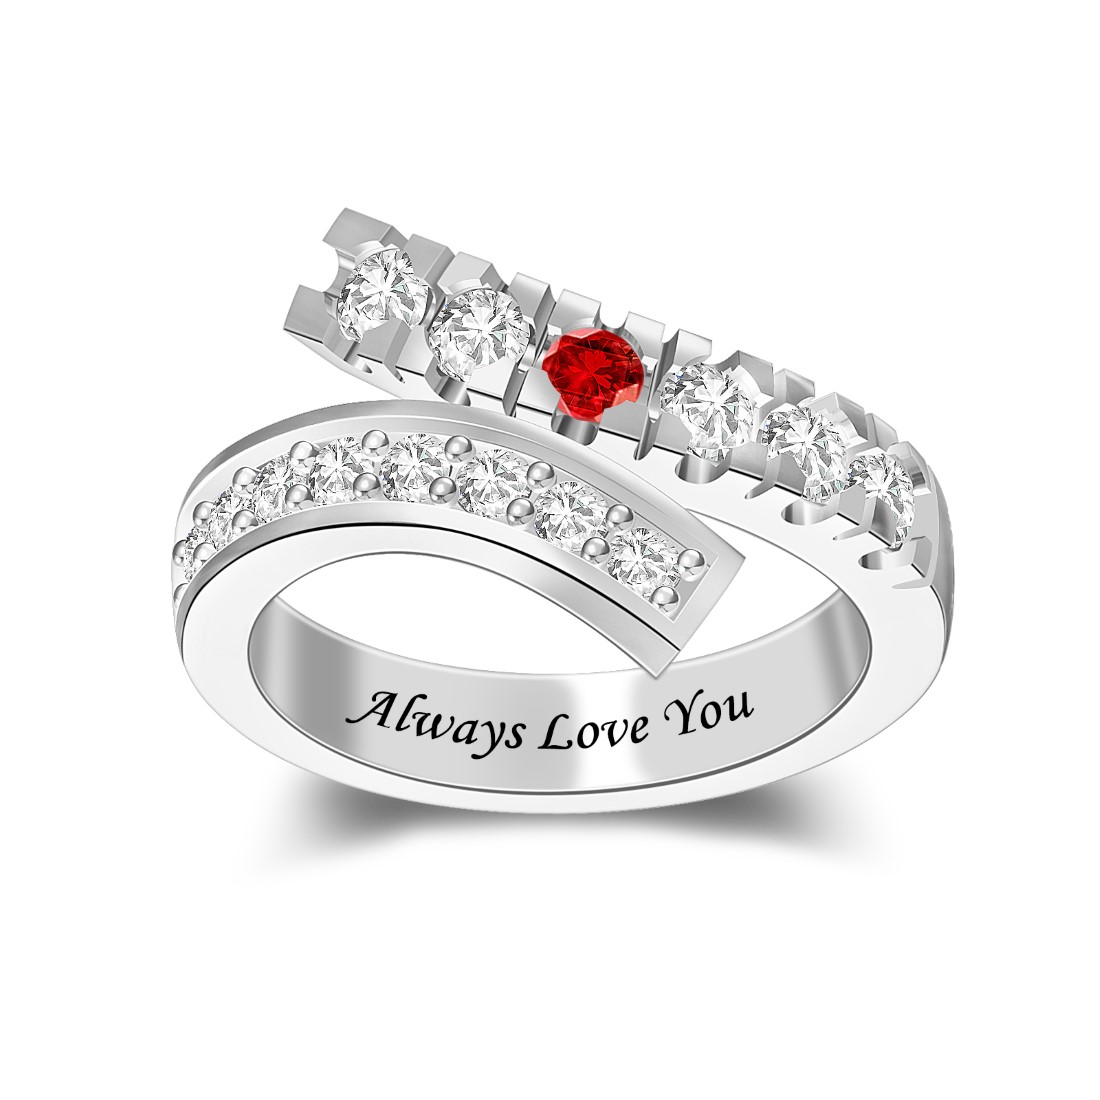 Filament Ribbon Birthstone Ring witn Free Engraved Content